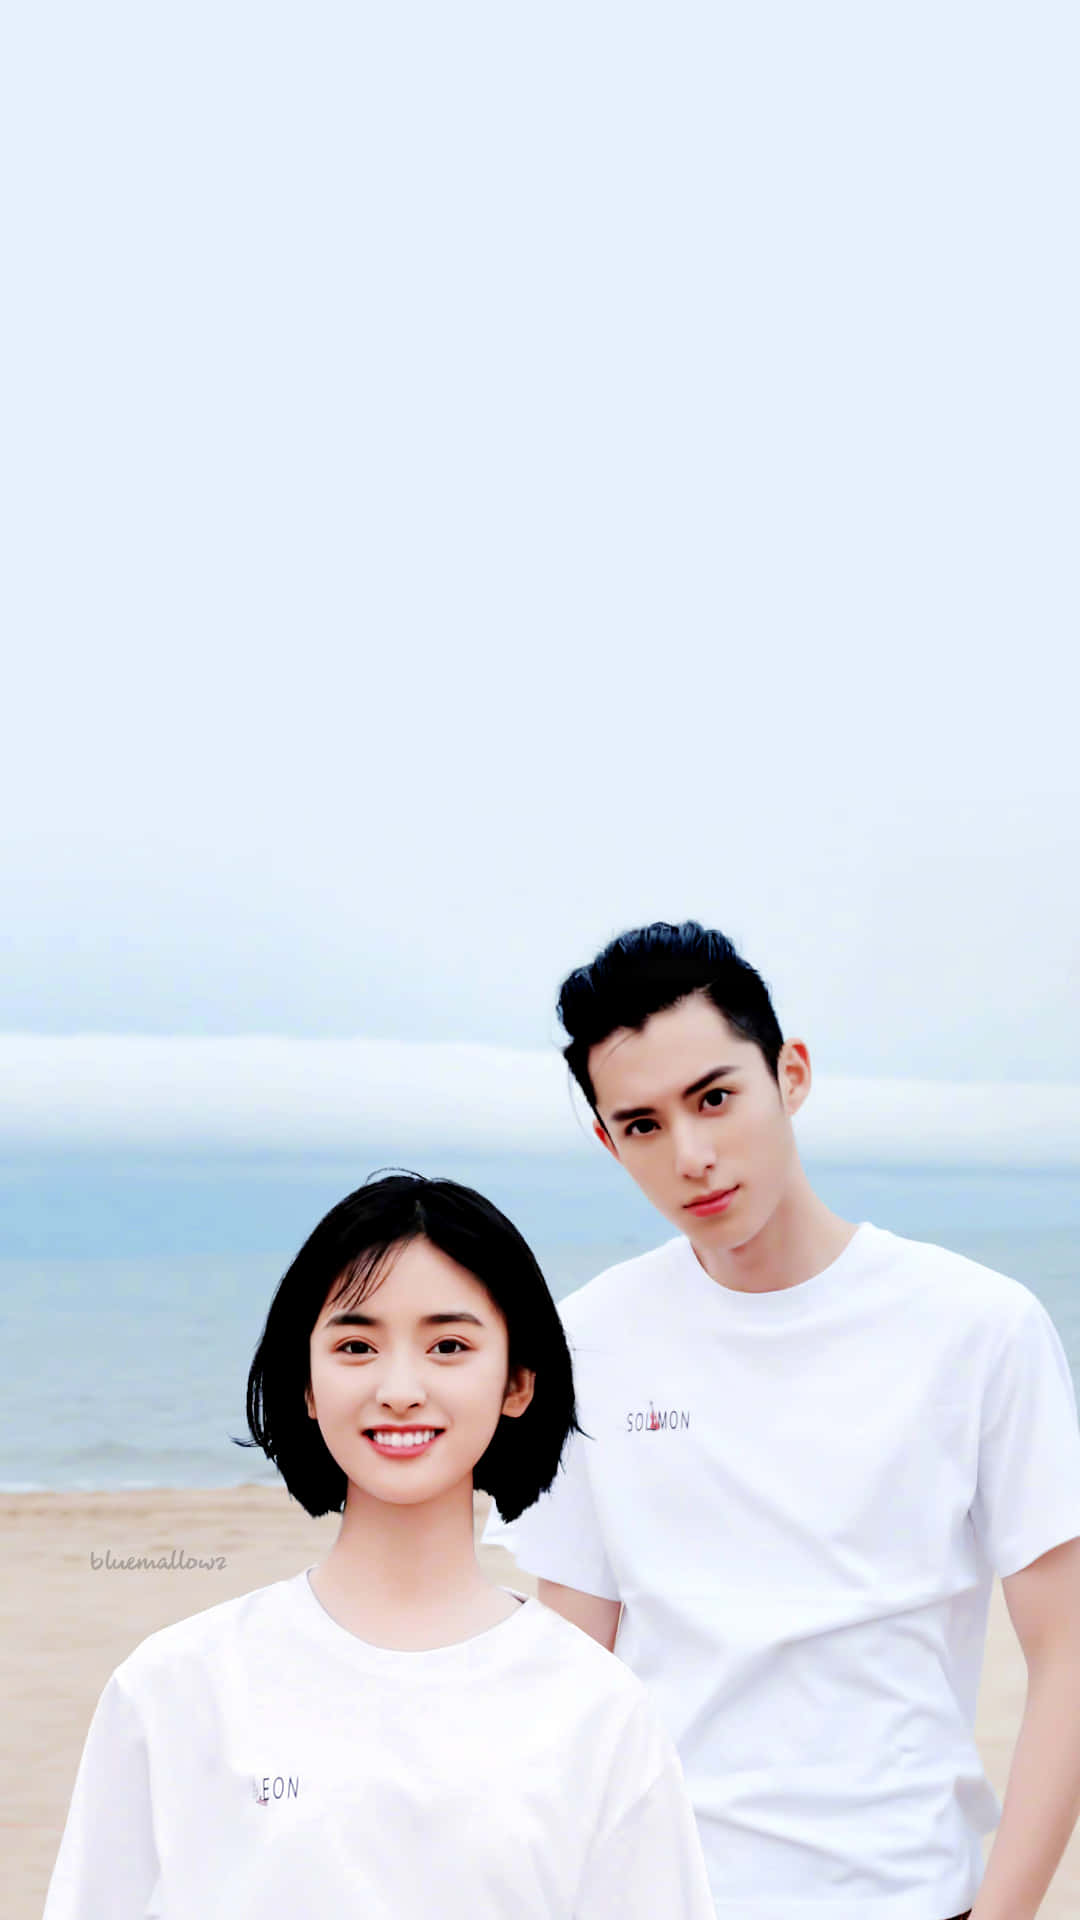 Dylan Wang With A Girl Wallpaper